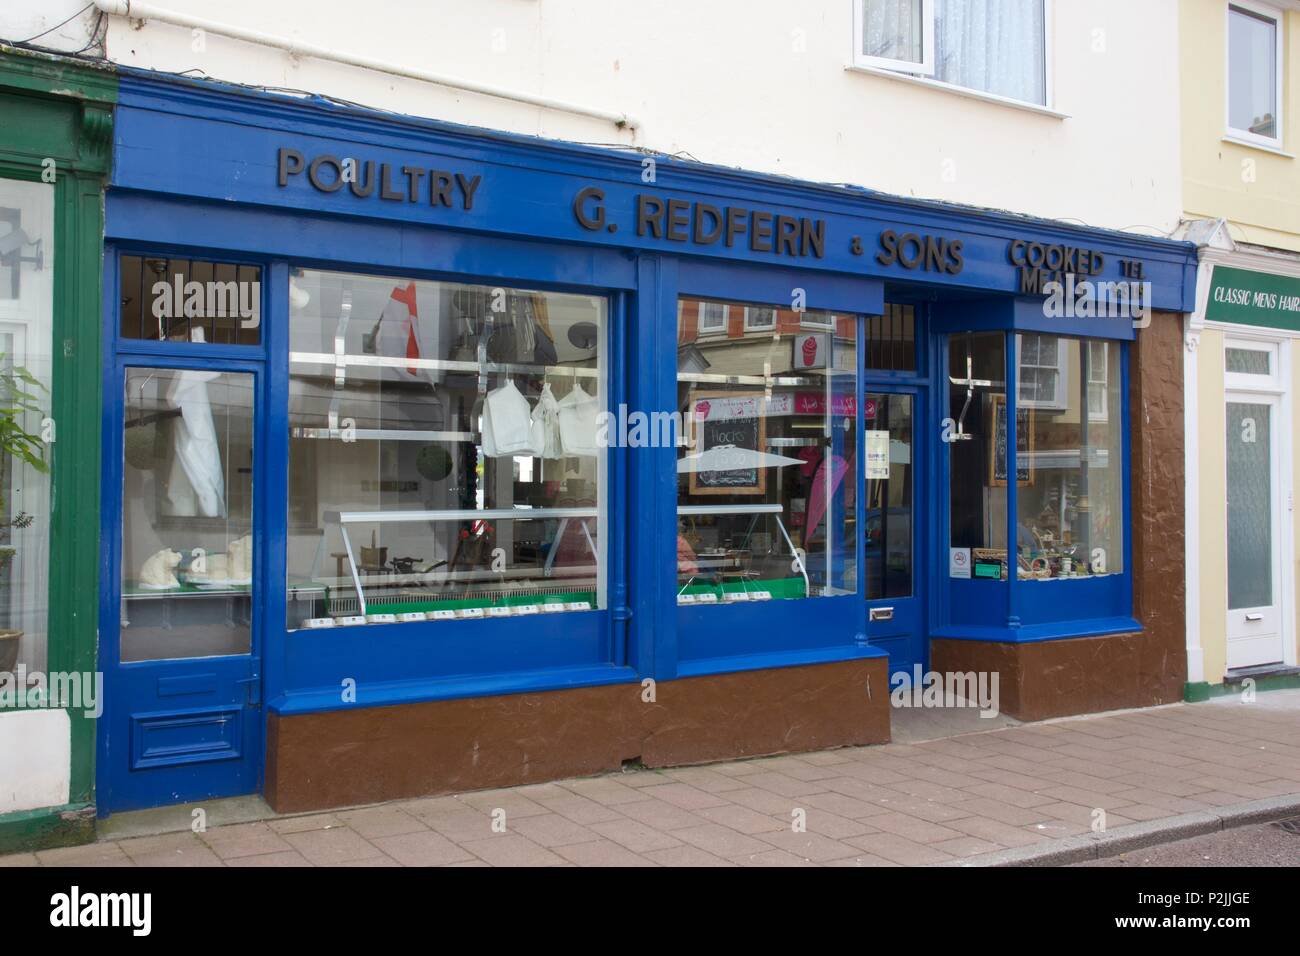 G Redfern & Sons, a local family butchers selling poultry and cooked meats, in Teignmouth, South Devon Stock Photo